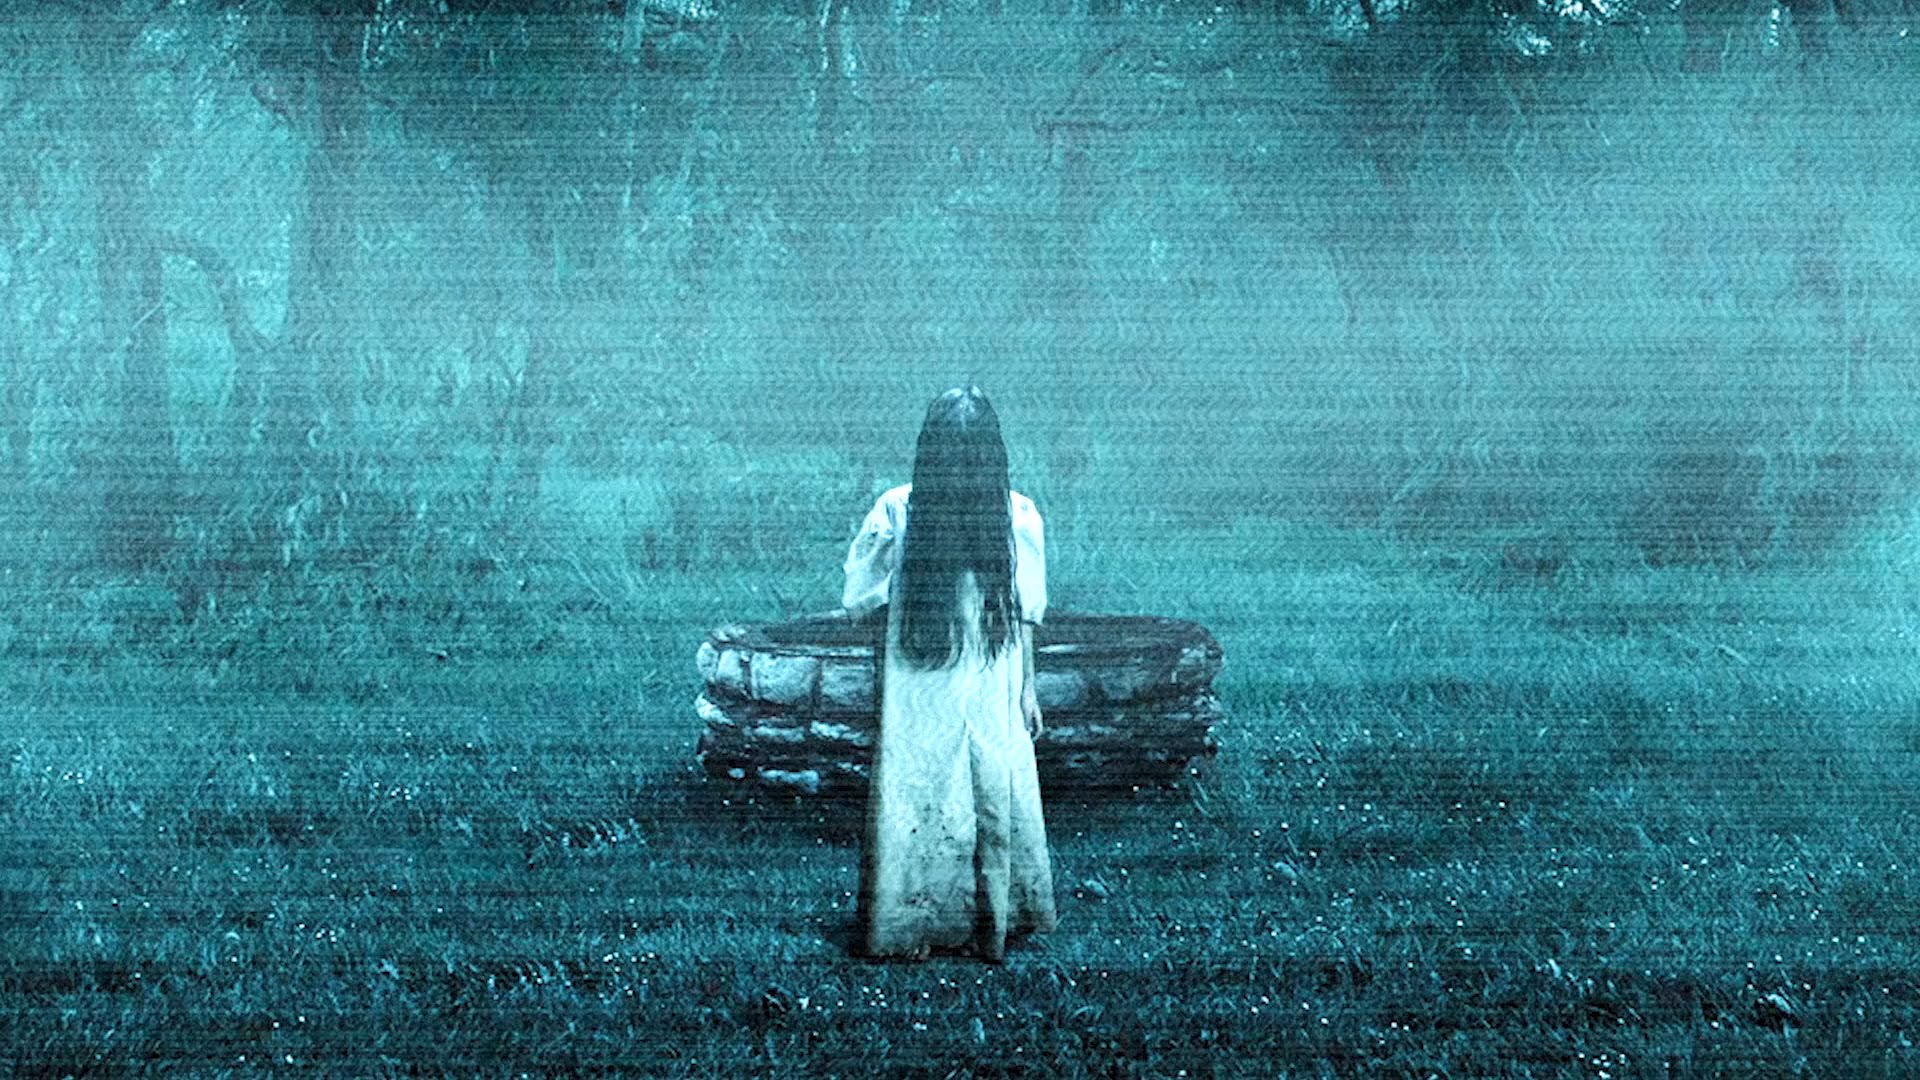 Experience the Terror of 'The Ring' For Yourself in VR - Bloody Disgusting